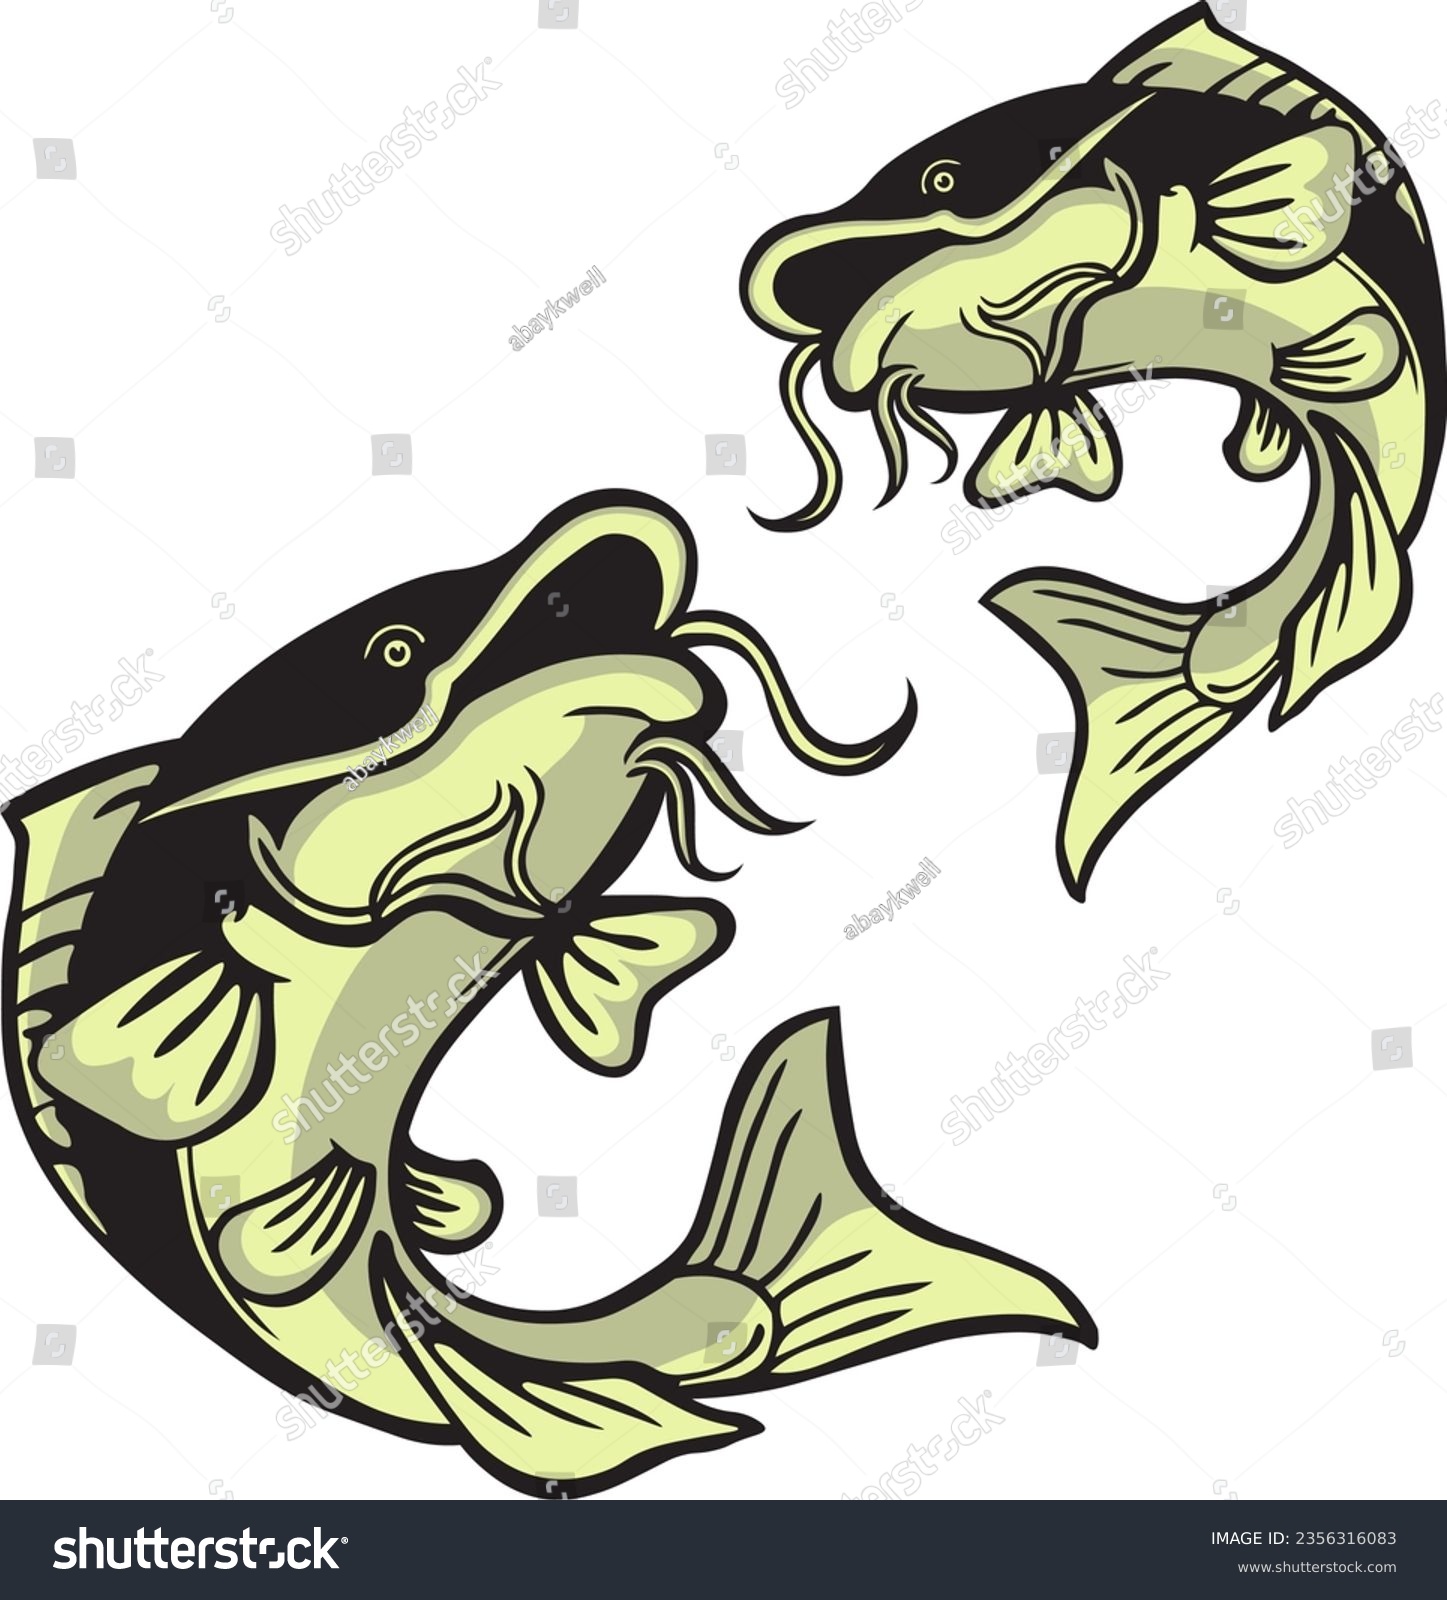 SVG of two catfish with separate parts, easy to re-edit and apply to various media, including print, screen printing, logos and others svg